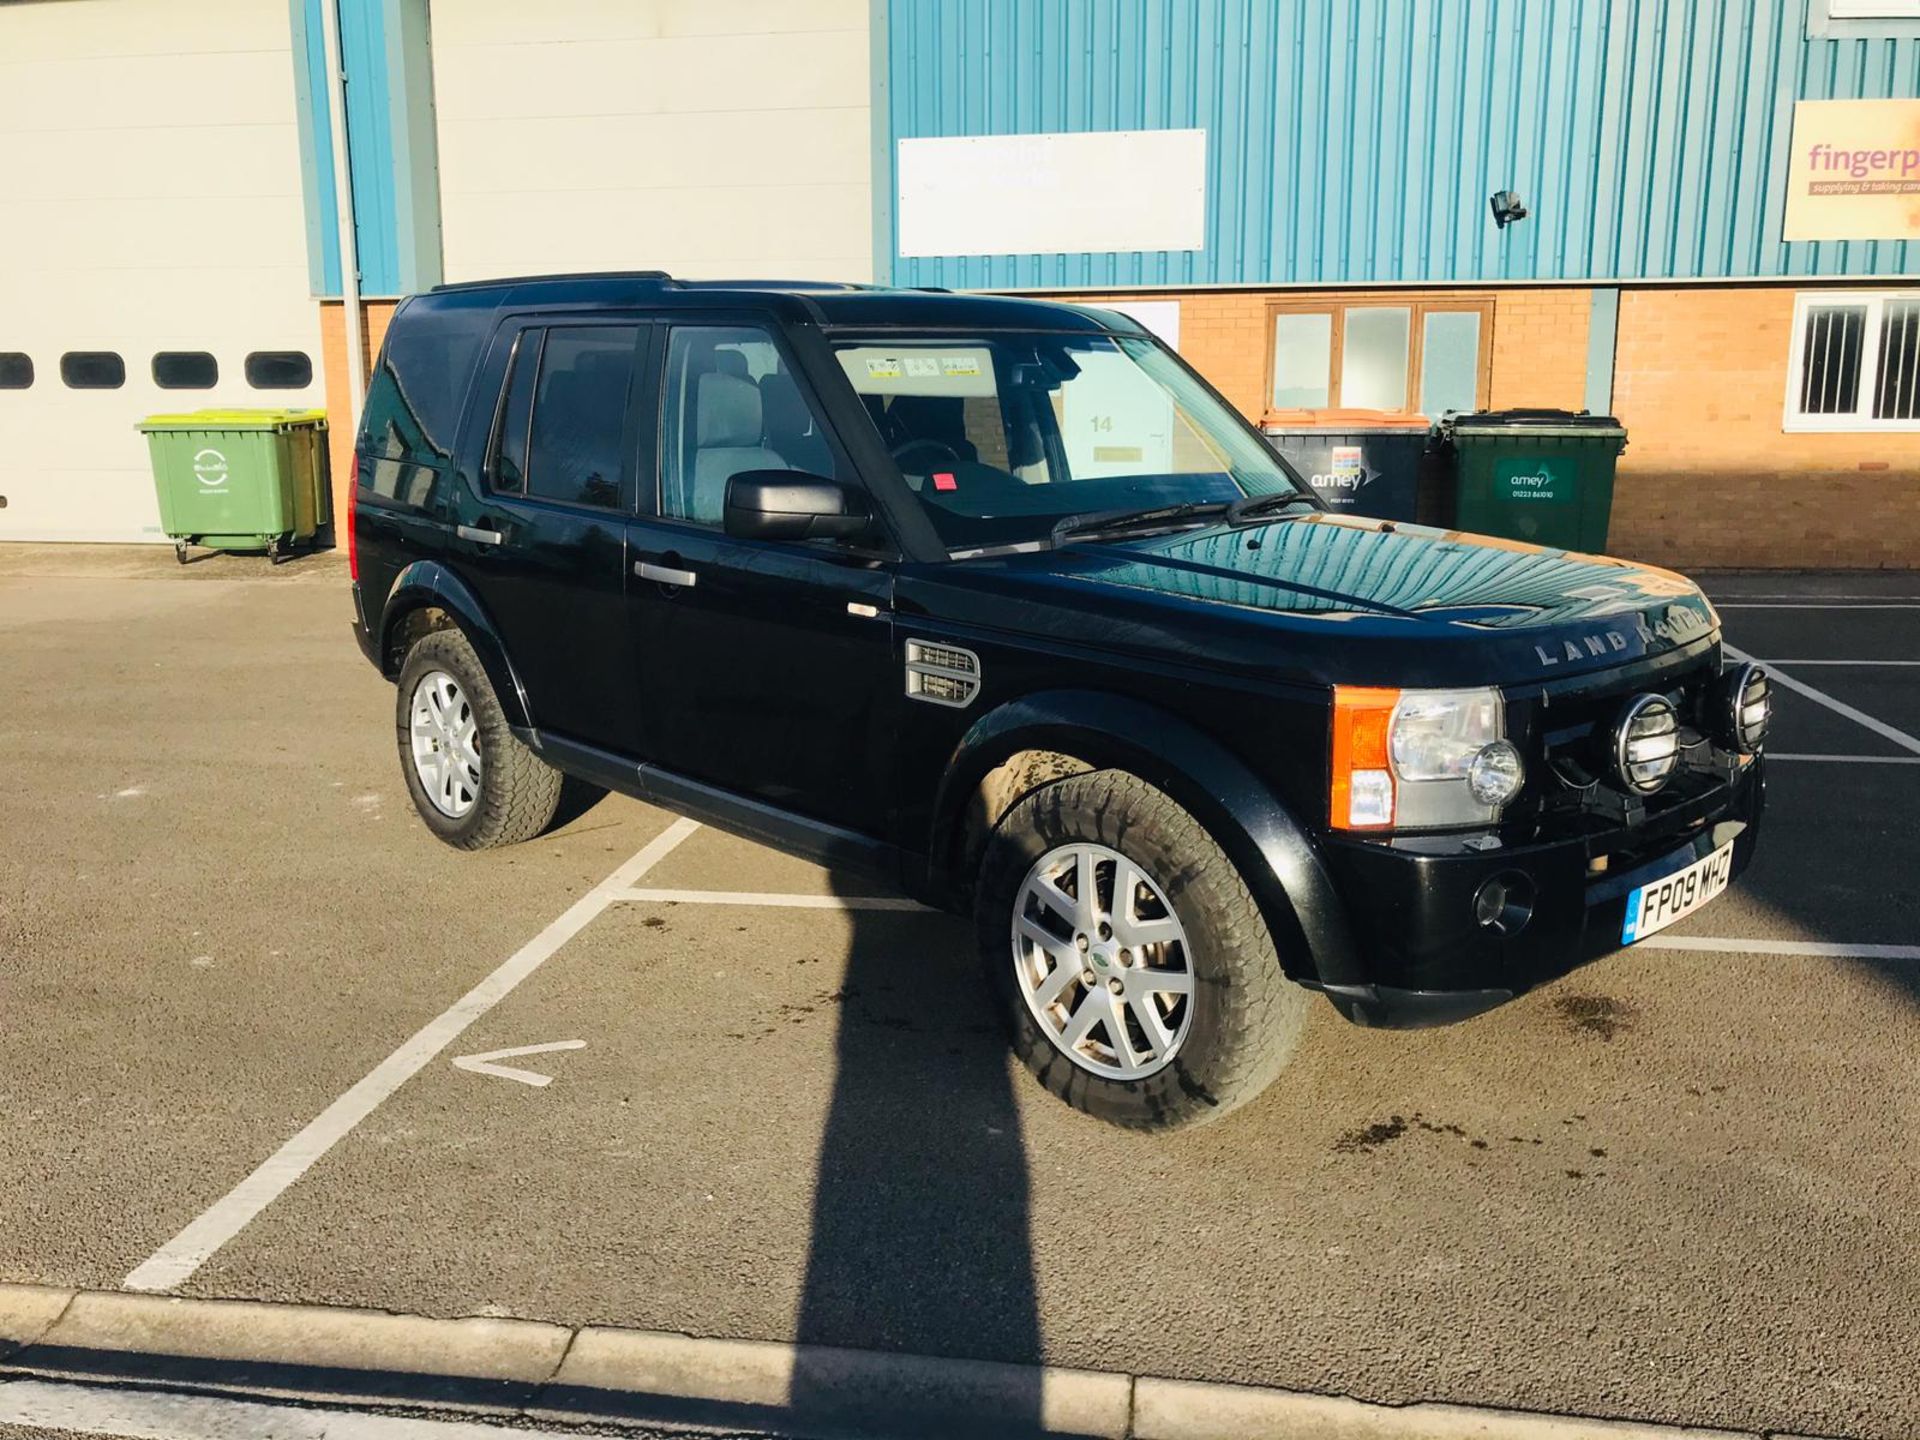 Land Rover Discovery 2.7 TDV6 GS Auto - 2009 09 Reg - 7 Seats - Tow Pack - Image 3 of 35